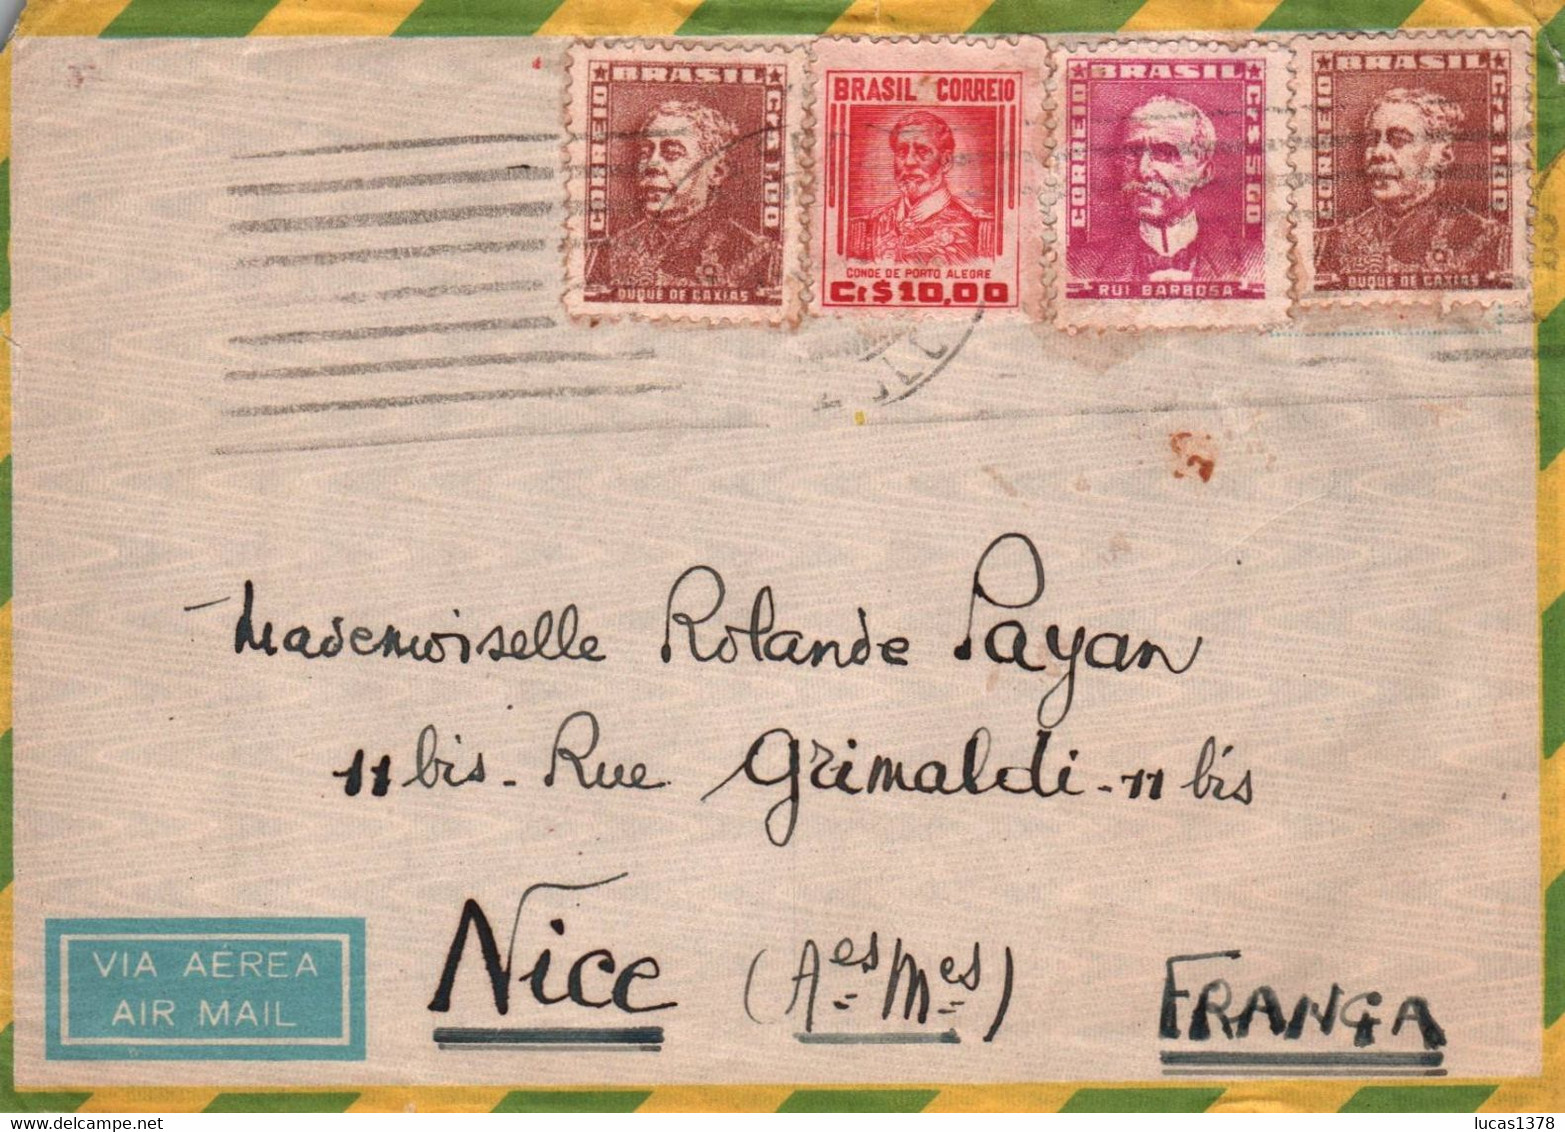 BRASIL / 1961 FOR NICE FRANCE  / VIA AEREA / AIR MAIL / PICTURE ON BACK / NICE STAMPS - Cartas & Documentos